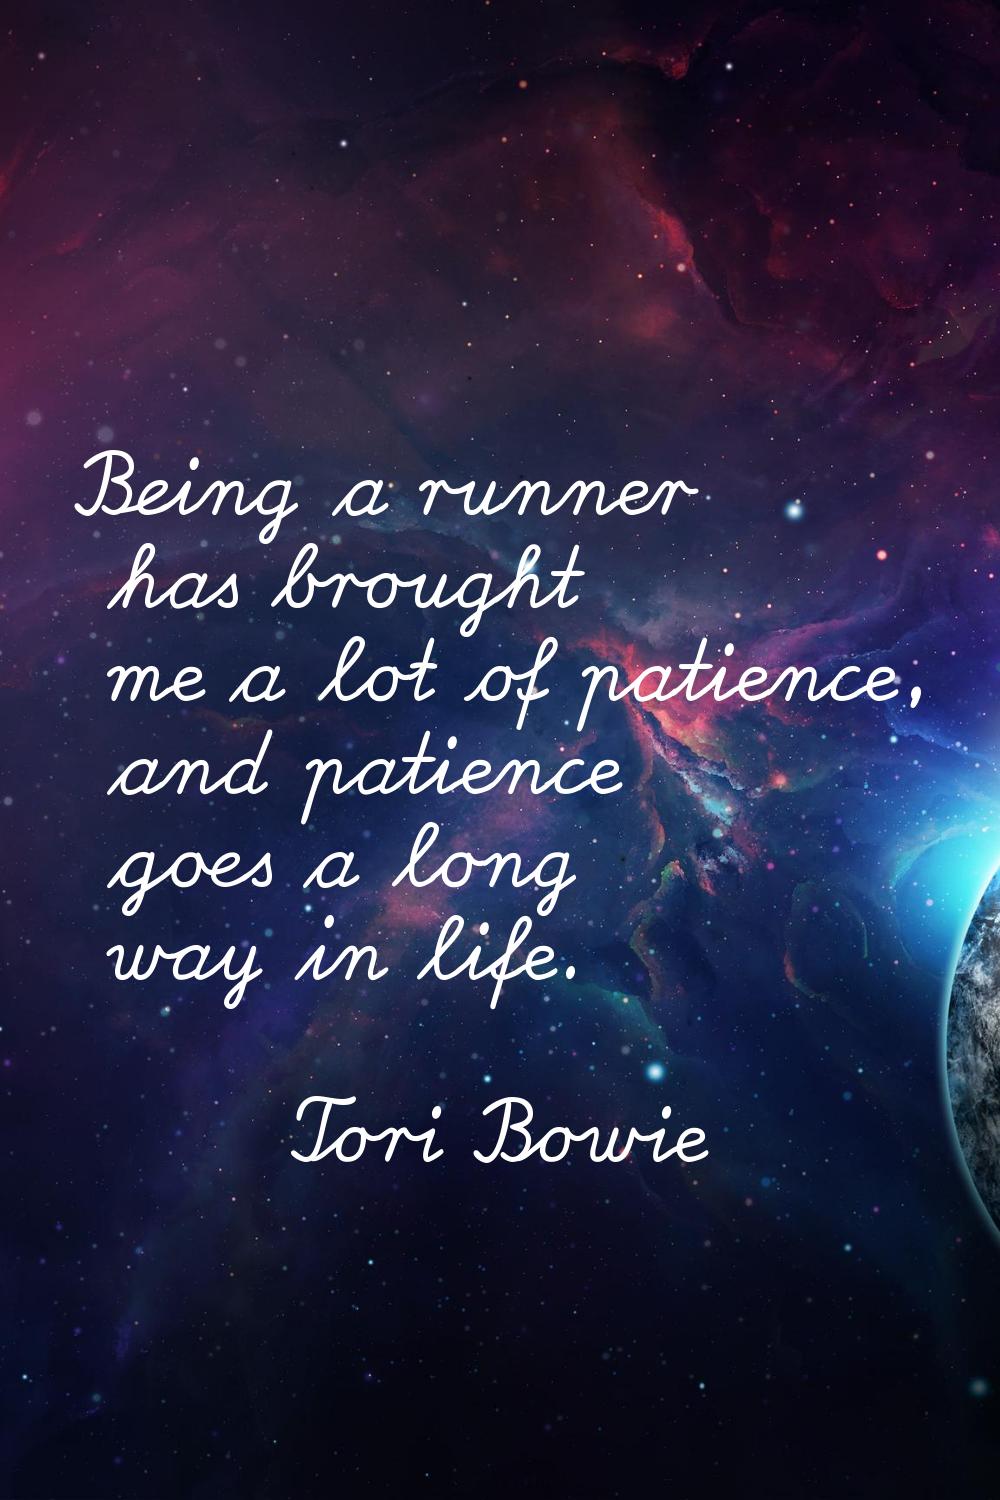 Being a runner has brought me a lot of patience, and patience goes a long way in life.